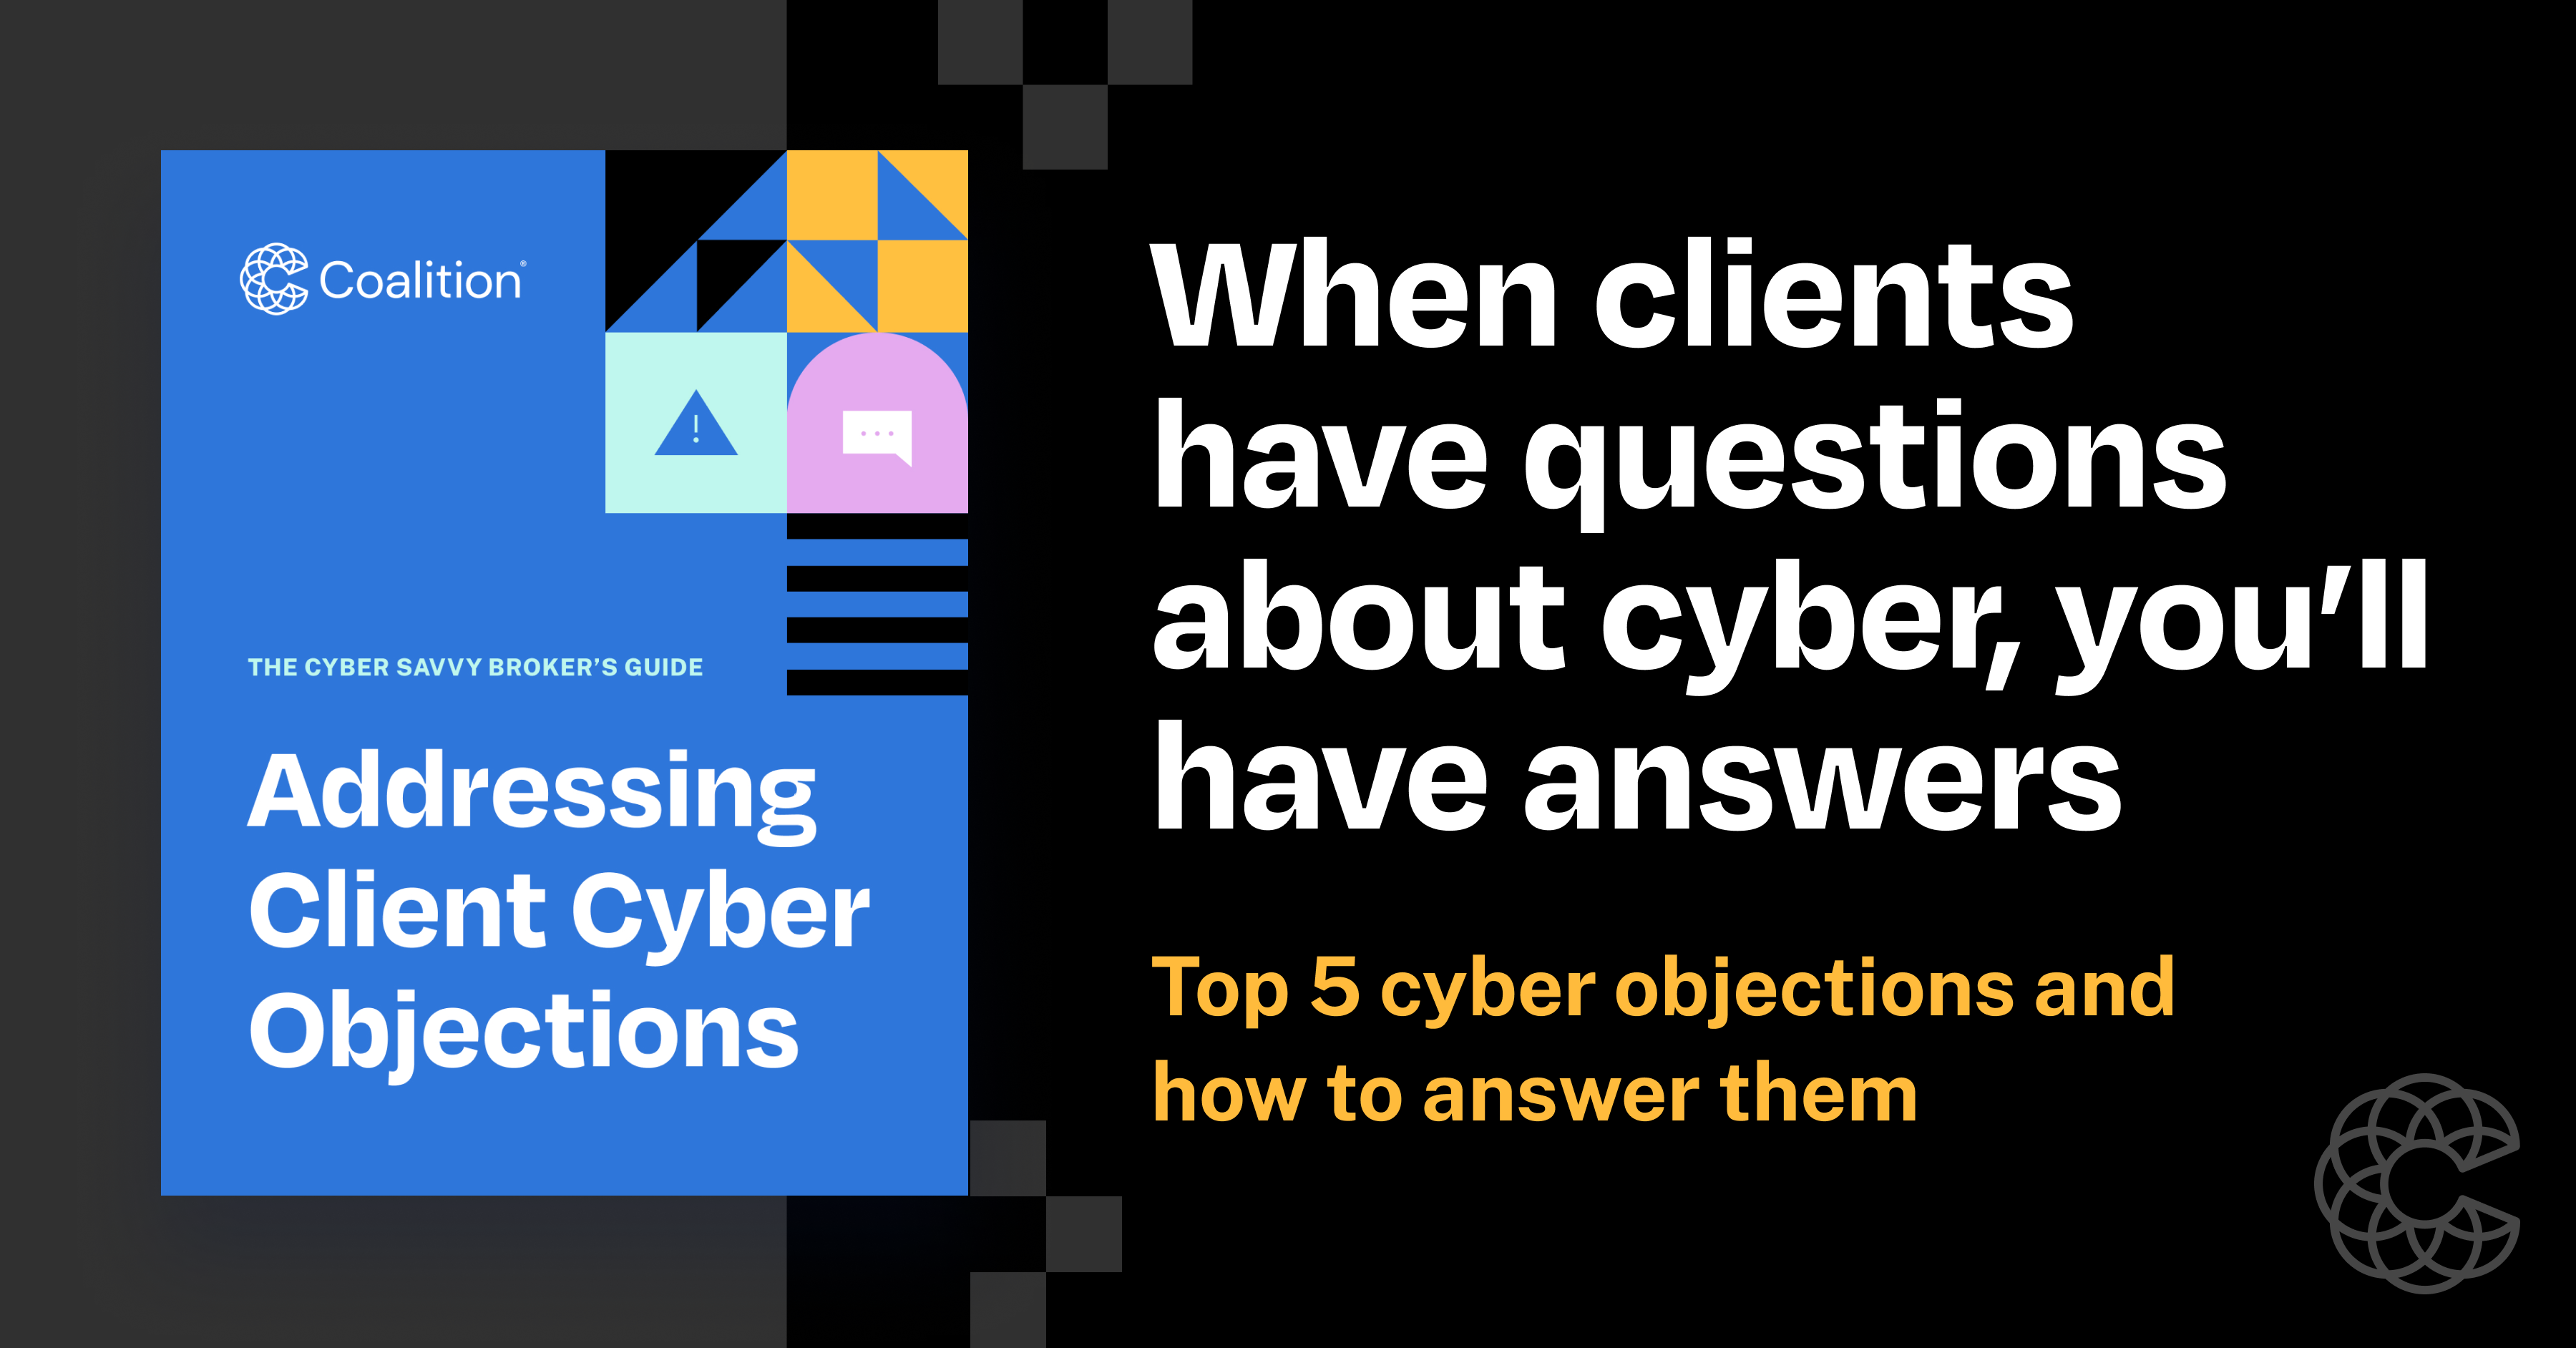 Screenshot of Cyber Savvy guide title page with copy "Addressing Client Cyber Objections"